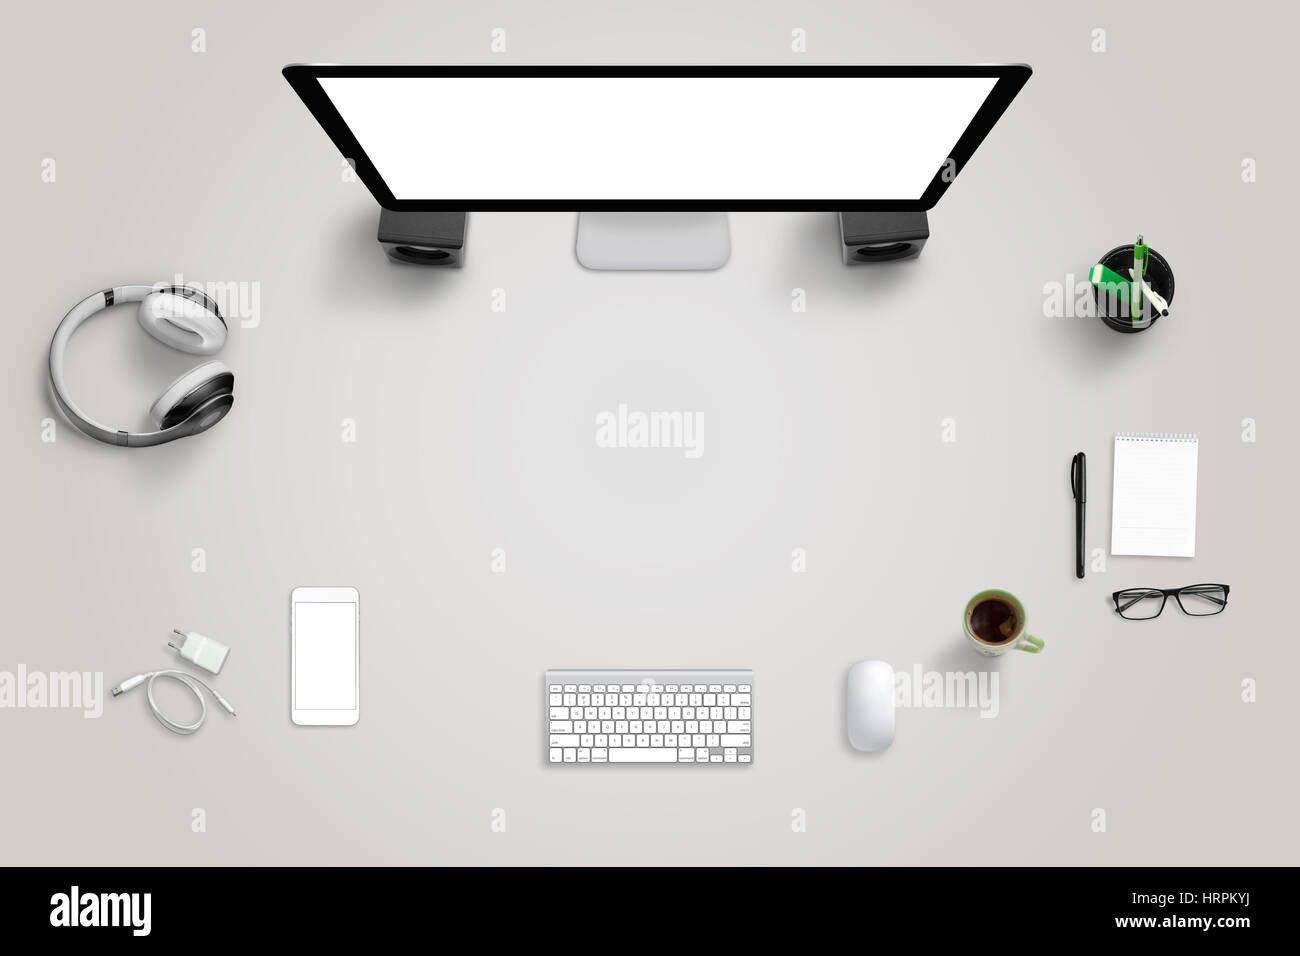 Desk with technology devices with free space for text. Top view of computer display, mobile phone, keyboard, mouse, headset, pad, glasses, coffee, pen Stock Photo